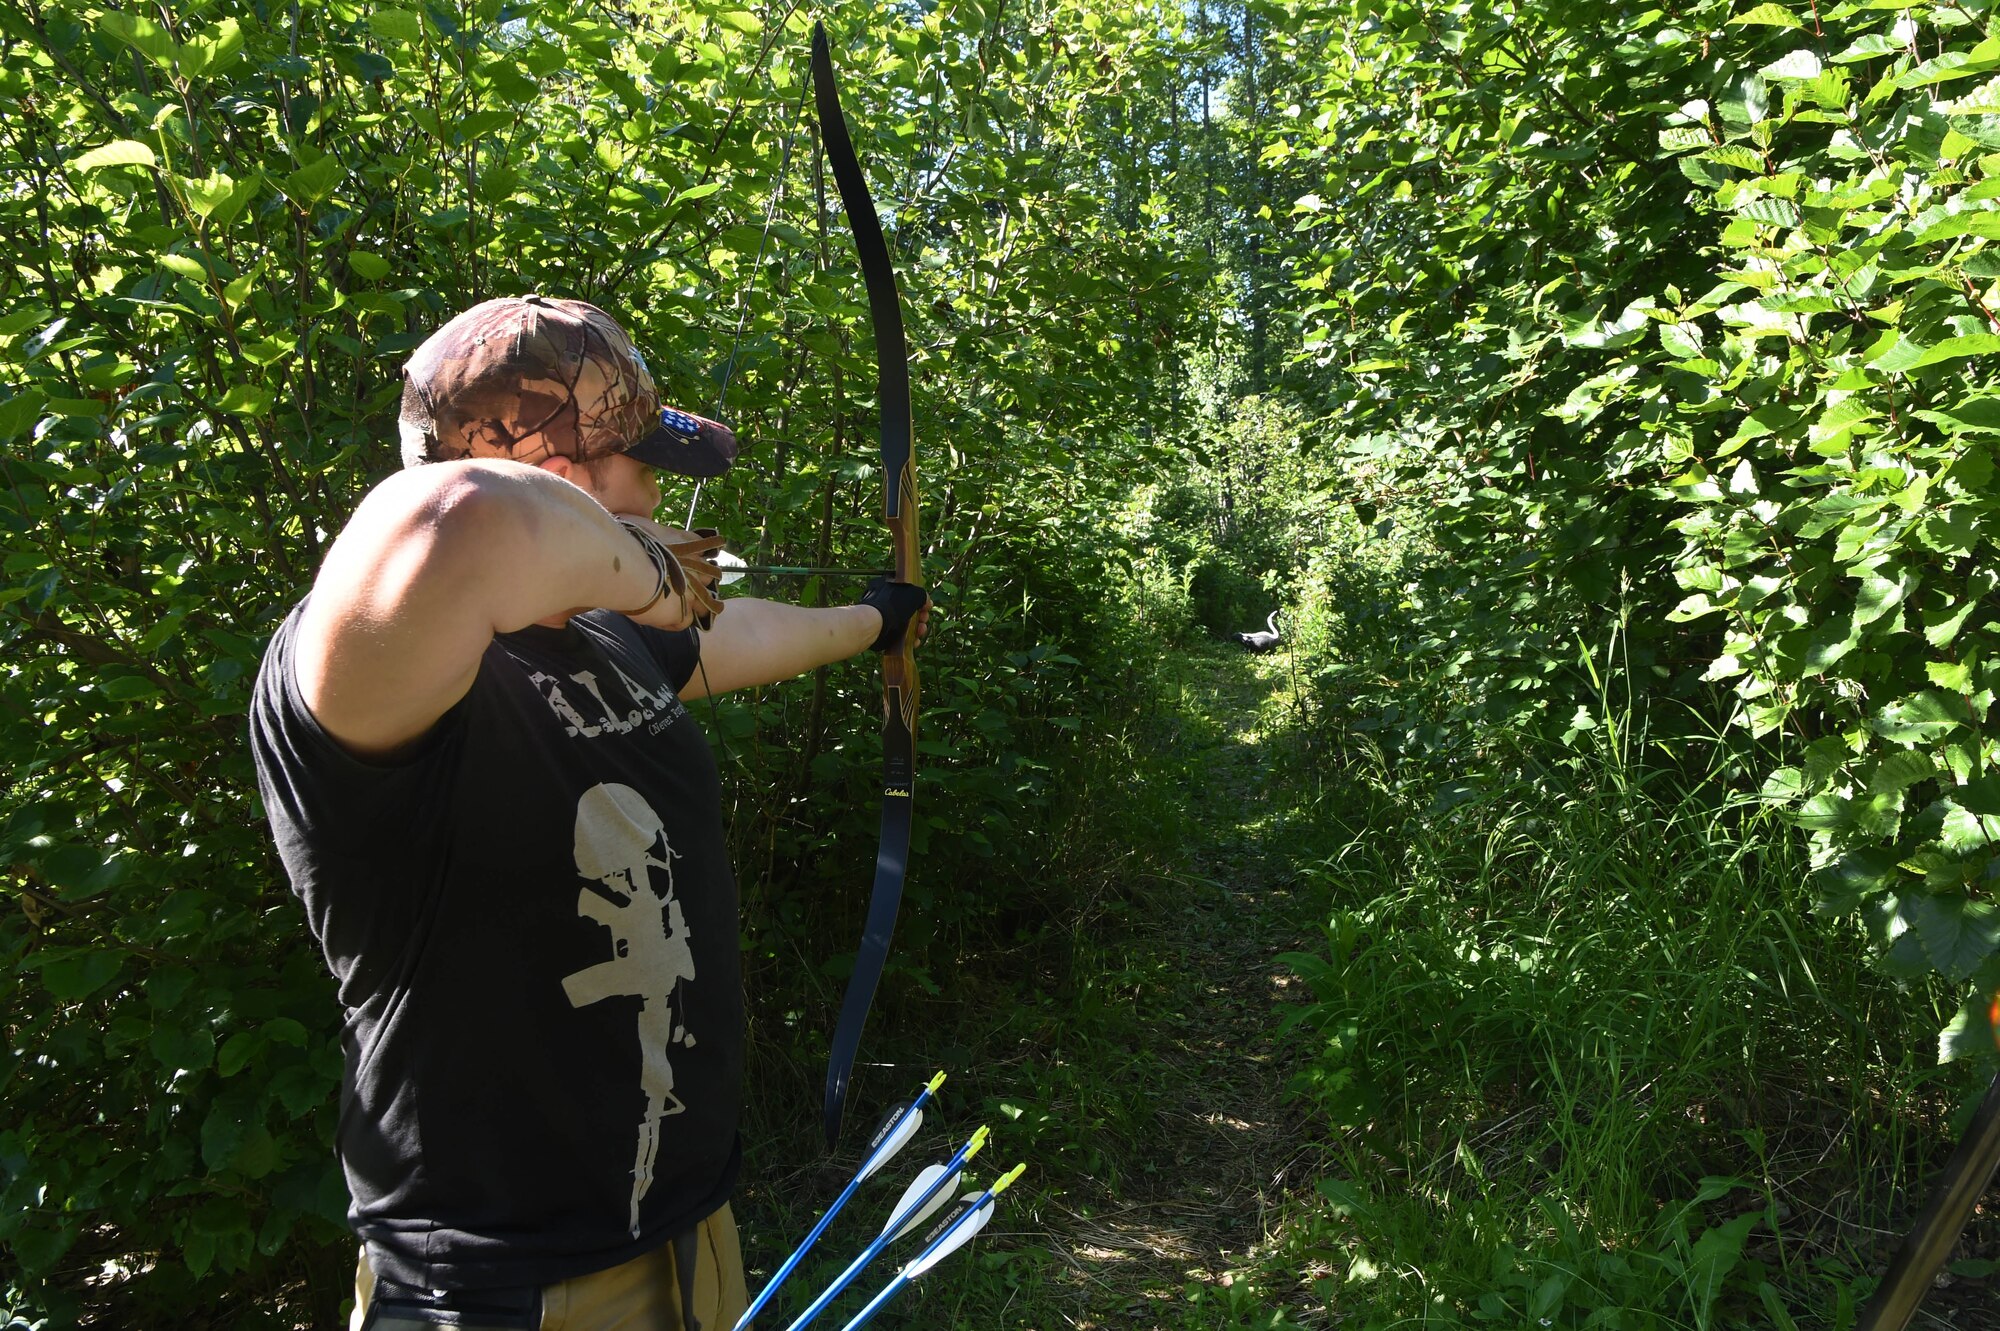 A service member uses undeveloped recreational areas for practicing archery at Joint Base Elmendorf-Richardson, Alaska June, 17 2016. Prior to any recreation on the base’s undeveloped areas, individuals 16 years and older must register in the iSportsman system.